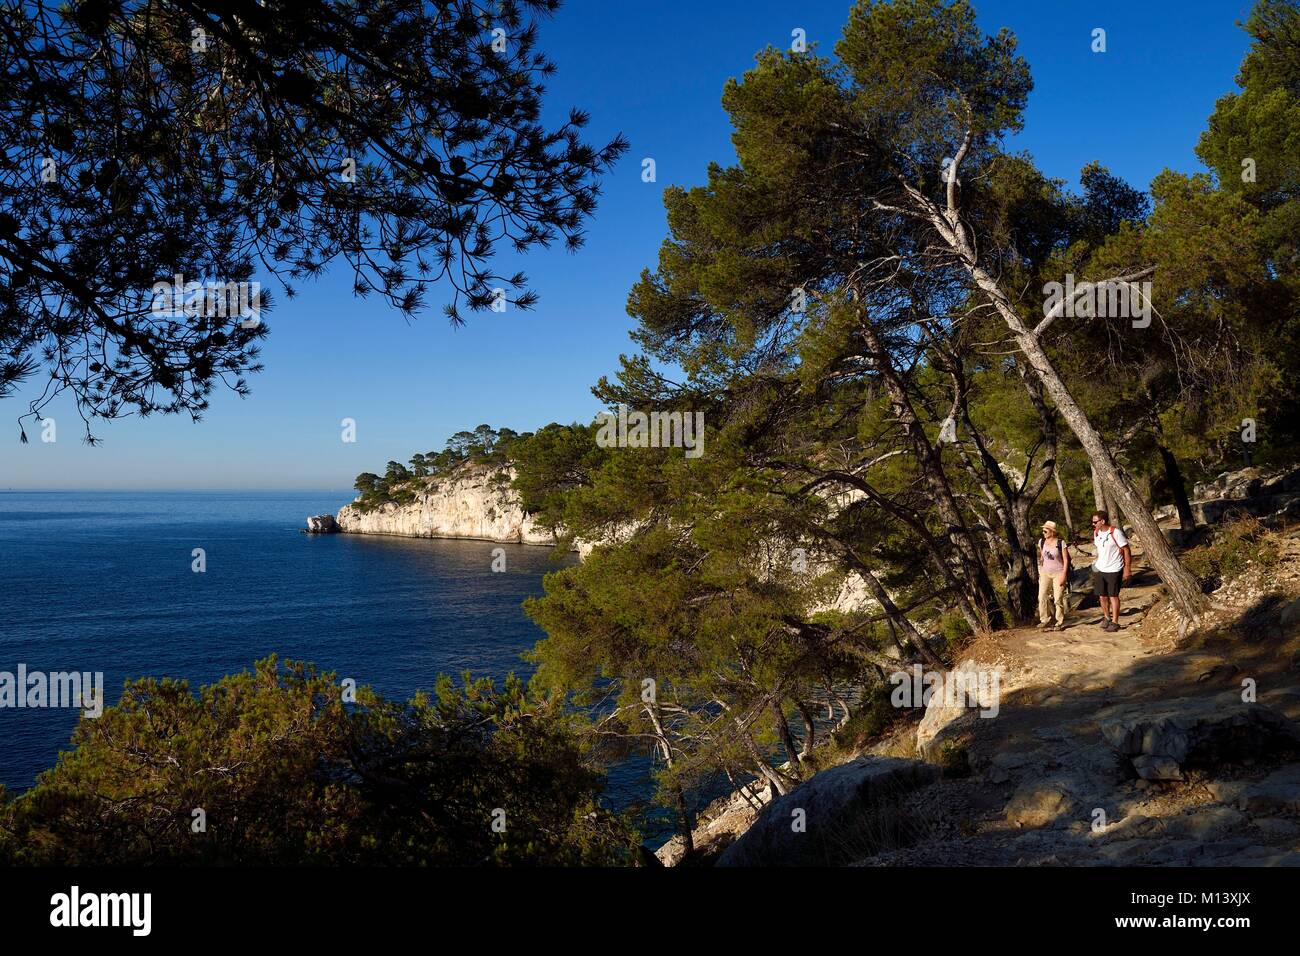 France, Bouches du Rhone, Marseille, National Park of the Calanques, Calanque de Port Pin (cove), Andre Bernard founder of the Cassis guide office hiking (request for authorization necessary before publication) Stock Photo